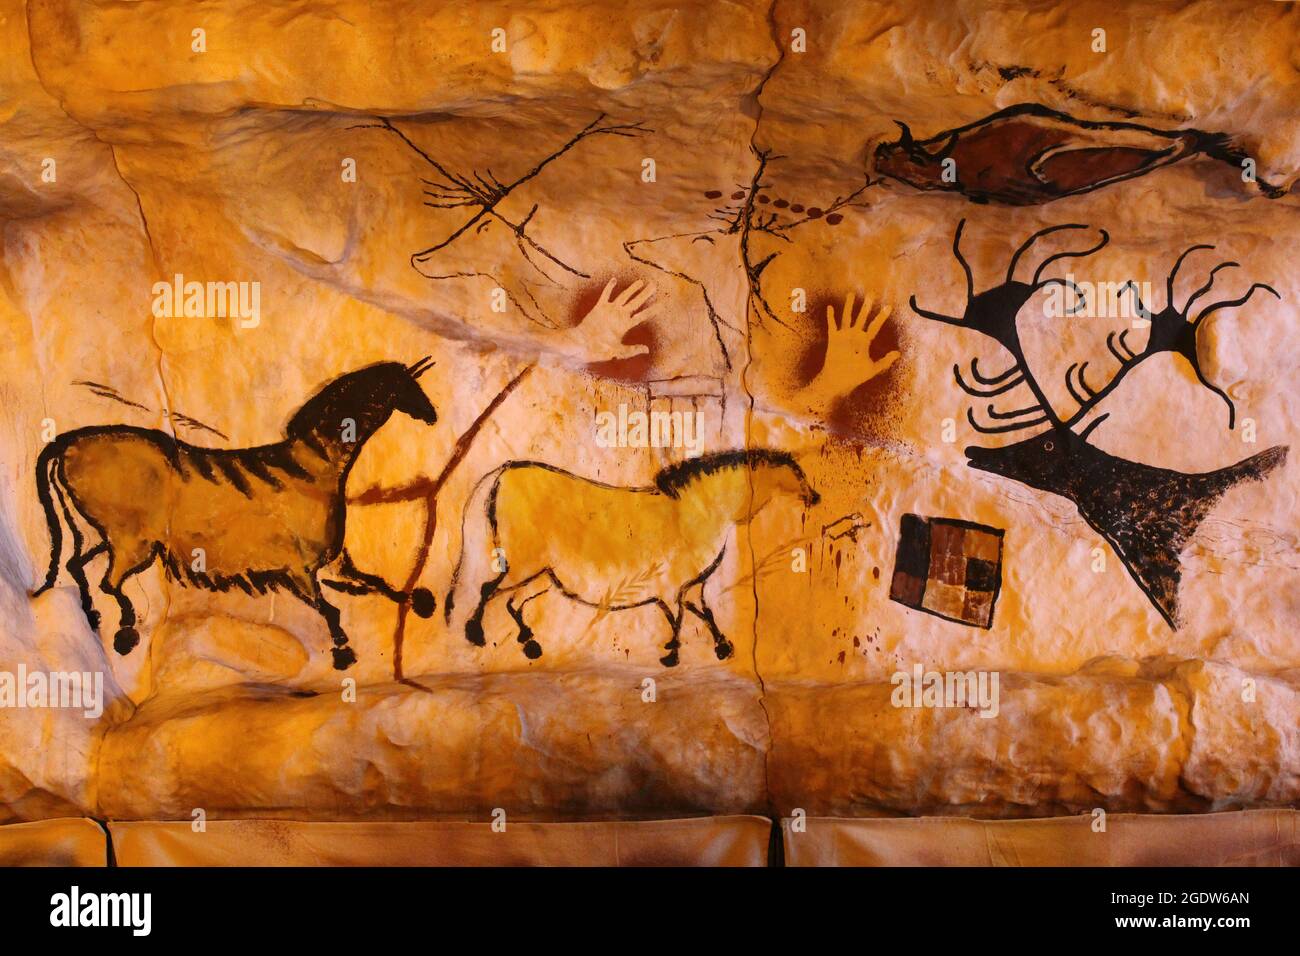 Modern Reconstruction of Prehistoric Cave With Art Depicting Animals and Hand Prints Stock Photo